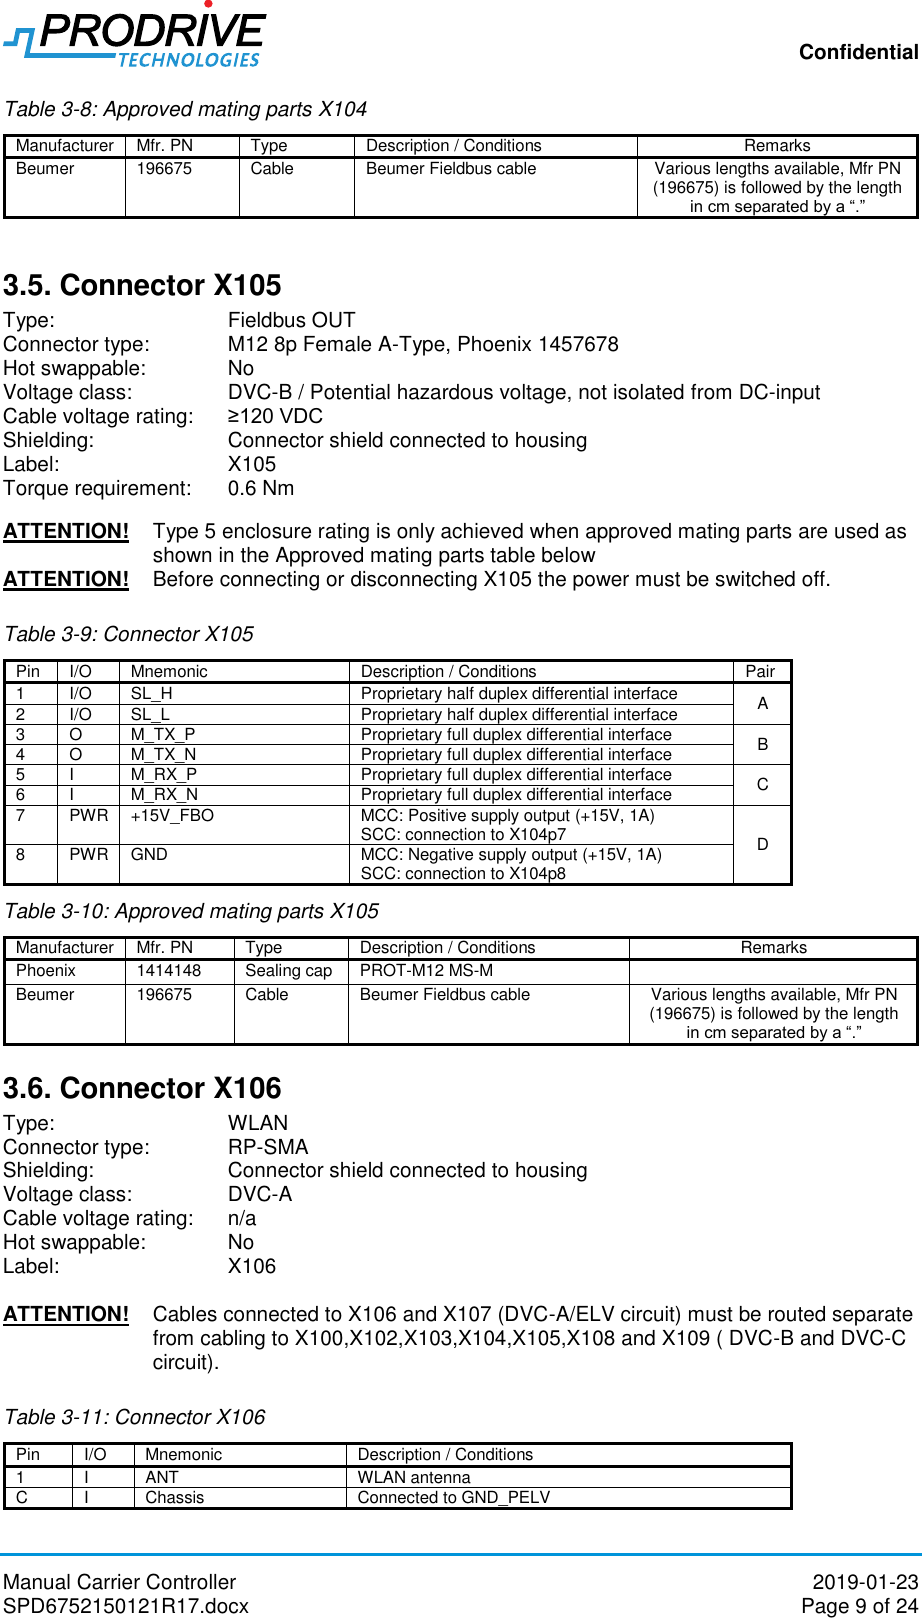 Confidential Manual Carrier Controller  2019-01-23 SPD6752150121R17.docx  Page 9 of 24 Table 3-8: Approved mating parts X104 Manufacturer Mfr. PN Type Description / Conditions Remarks Beumer 196675 Cable Beumer Fieldbus cable Various lengths available, Mfr PN (196675) is followed by the length in cm separated by a “.”  3.5. Connector X105 Type:       Fieldbus OUT Connector type:   M12 8p Female A-Type, Phoenix 1457678 Hot swappable:   No Voltage class:    DVC-B / Potential hazardous voltage, not isolated from DC-input Cable voltage rating:   ≥120 VDC Shielding:    Connector shield connected to housing Label:       X105 Torque requirement:  0.6 Nm  ATTENTION!  Type 5 enclosure rating is only achieved when approved mating parts are used as shown in the Approved mating parts table below  ATTENTION!  Before connecting or disconnecting X105 the power must be switched off.  Table 3-9: Connector X105 Pin I/O Mnemonic Description / Conditions Pair 1 I/O SL_H Proprietary half duplex differential interface A 2 I/O SL_L Proprietary half duplex differential interface 3 O M_TX_P Proprietary full duplex differential interface B 4 O M_TX_N Proprietary full duplex differential interface 5 I M_RX_P Proprietary full duplex differential interface C 6 I M_RX_N Proprietary full duplex differential interface 7 PWR +15V_FBO MCC: Positive supply output (+15V, 1A) SCC: connection to X104p7 D 8 PWR GND MCC: Negative supply output (+15V, 1A) SCC: connection to X104p8 Table 3-10: Approved mating parts X105 Manufacturer Mfr. PN Type Description / Conditions Remarks Phoenix 1414148 Sealing cap PROT-M12 MS-M  Beumer 196675 Cable Beumer Fieldbus cable Various lengths available, Mfr PN (196675) is followed by the length in cm separated by a “.” 3.6. Connector X106 Type:       WLAN Connector type:   RP-SMA Shielding:    Connector shield connected to housing Voltage class:    DVC-A Cable voltage rating:   n/a Hot swappable:   No Label:       X106  ATTENTION!  Cables connected to X106 and X107 (DVC-A/ELV circuit) must be routed separate from cabling to X100,X102,X103,X104,X105,X108 and X109 ( DVC-B and DVC-C circuit).  Table 3-11: Connector X106 Pin I/O Mnemonic Description / Conditions 1 I ANT WLAN antenna C I Chassis Connected to GND_PELV 